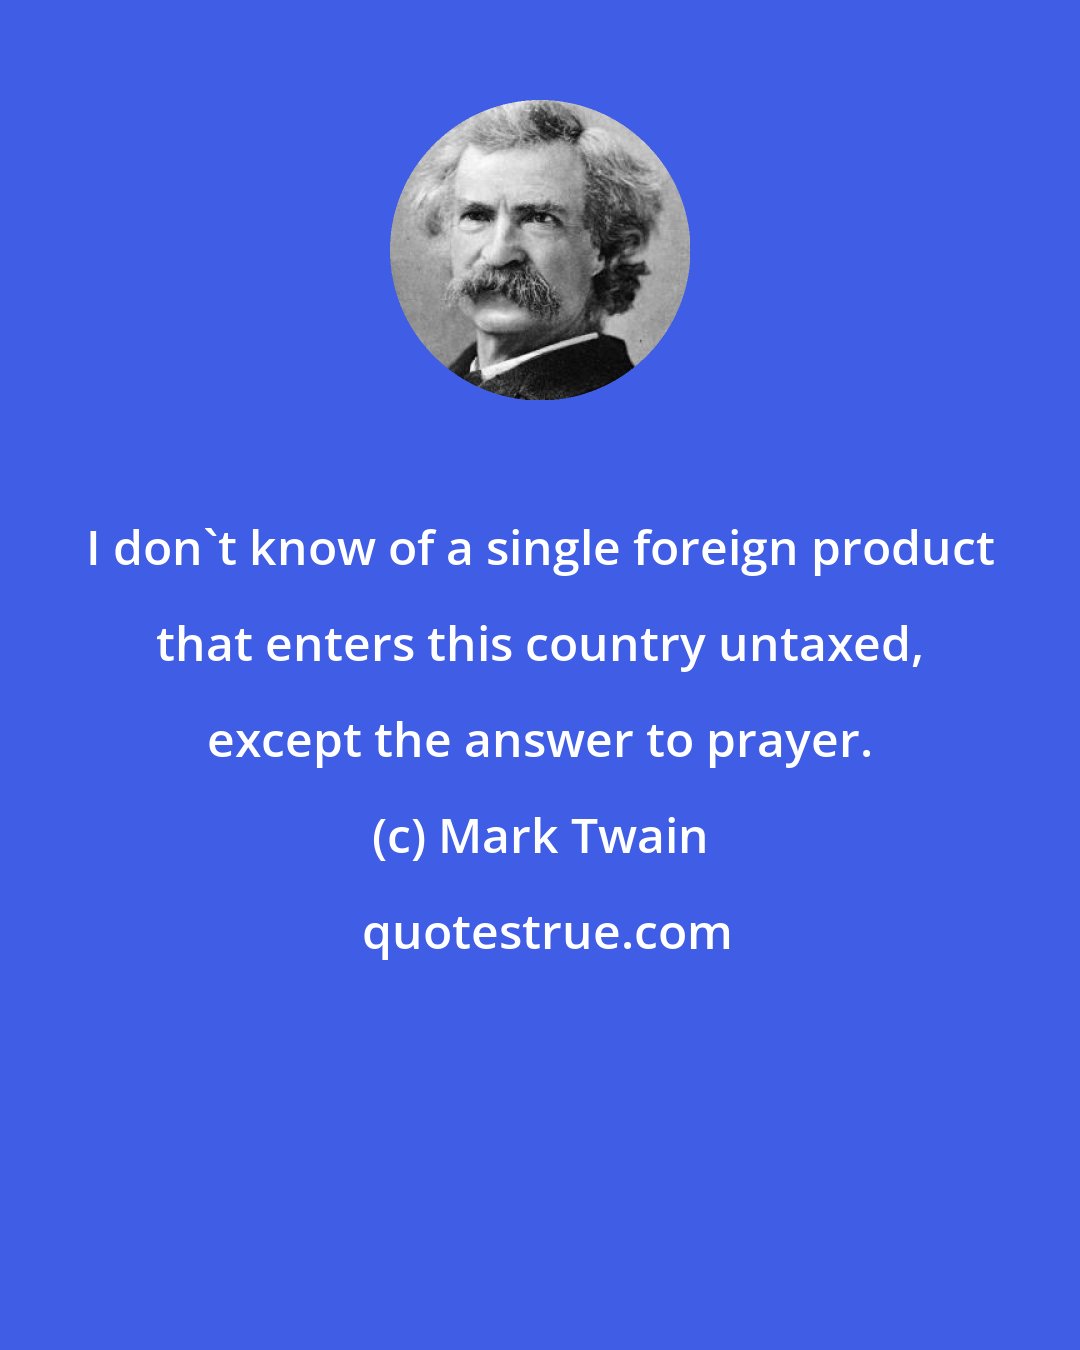 Mark Twain: I don't know of a single foreign product that enters this country untaxed, except the answer to prayer.